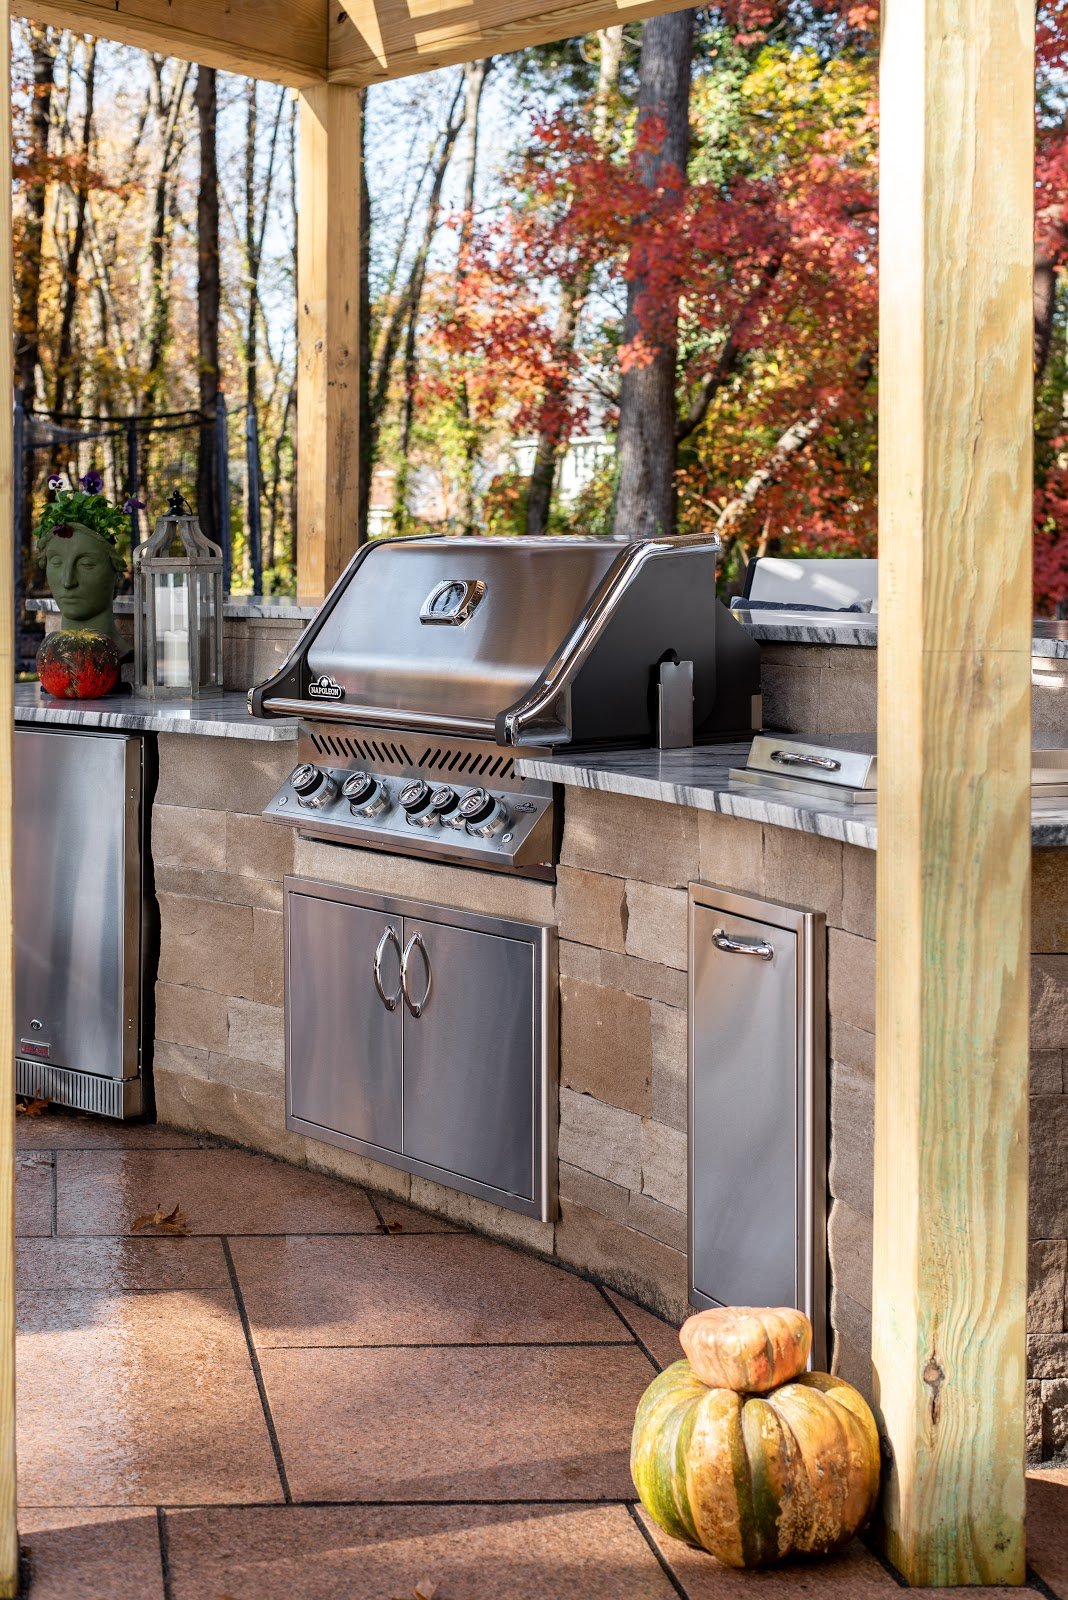 photo of the outdoor grill accompanied by Polycor stone